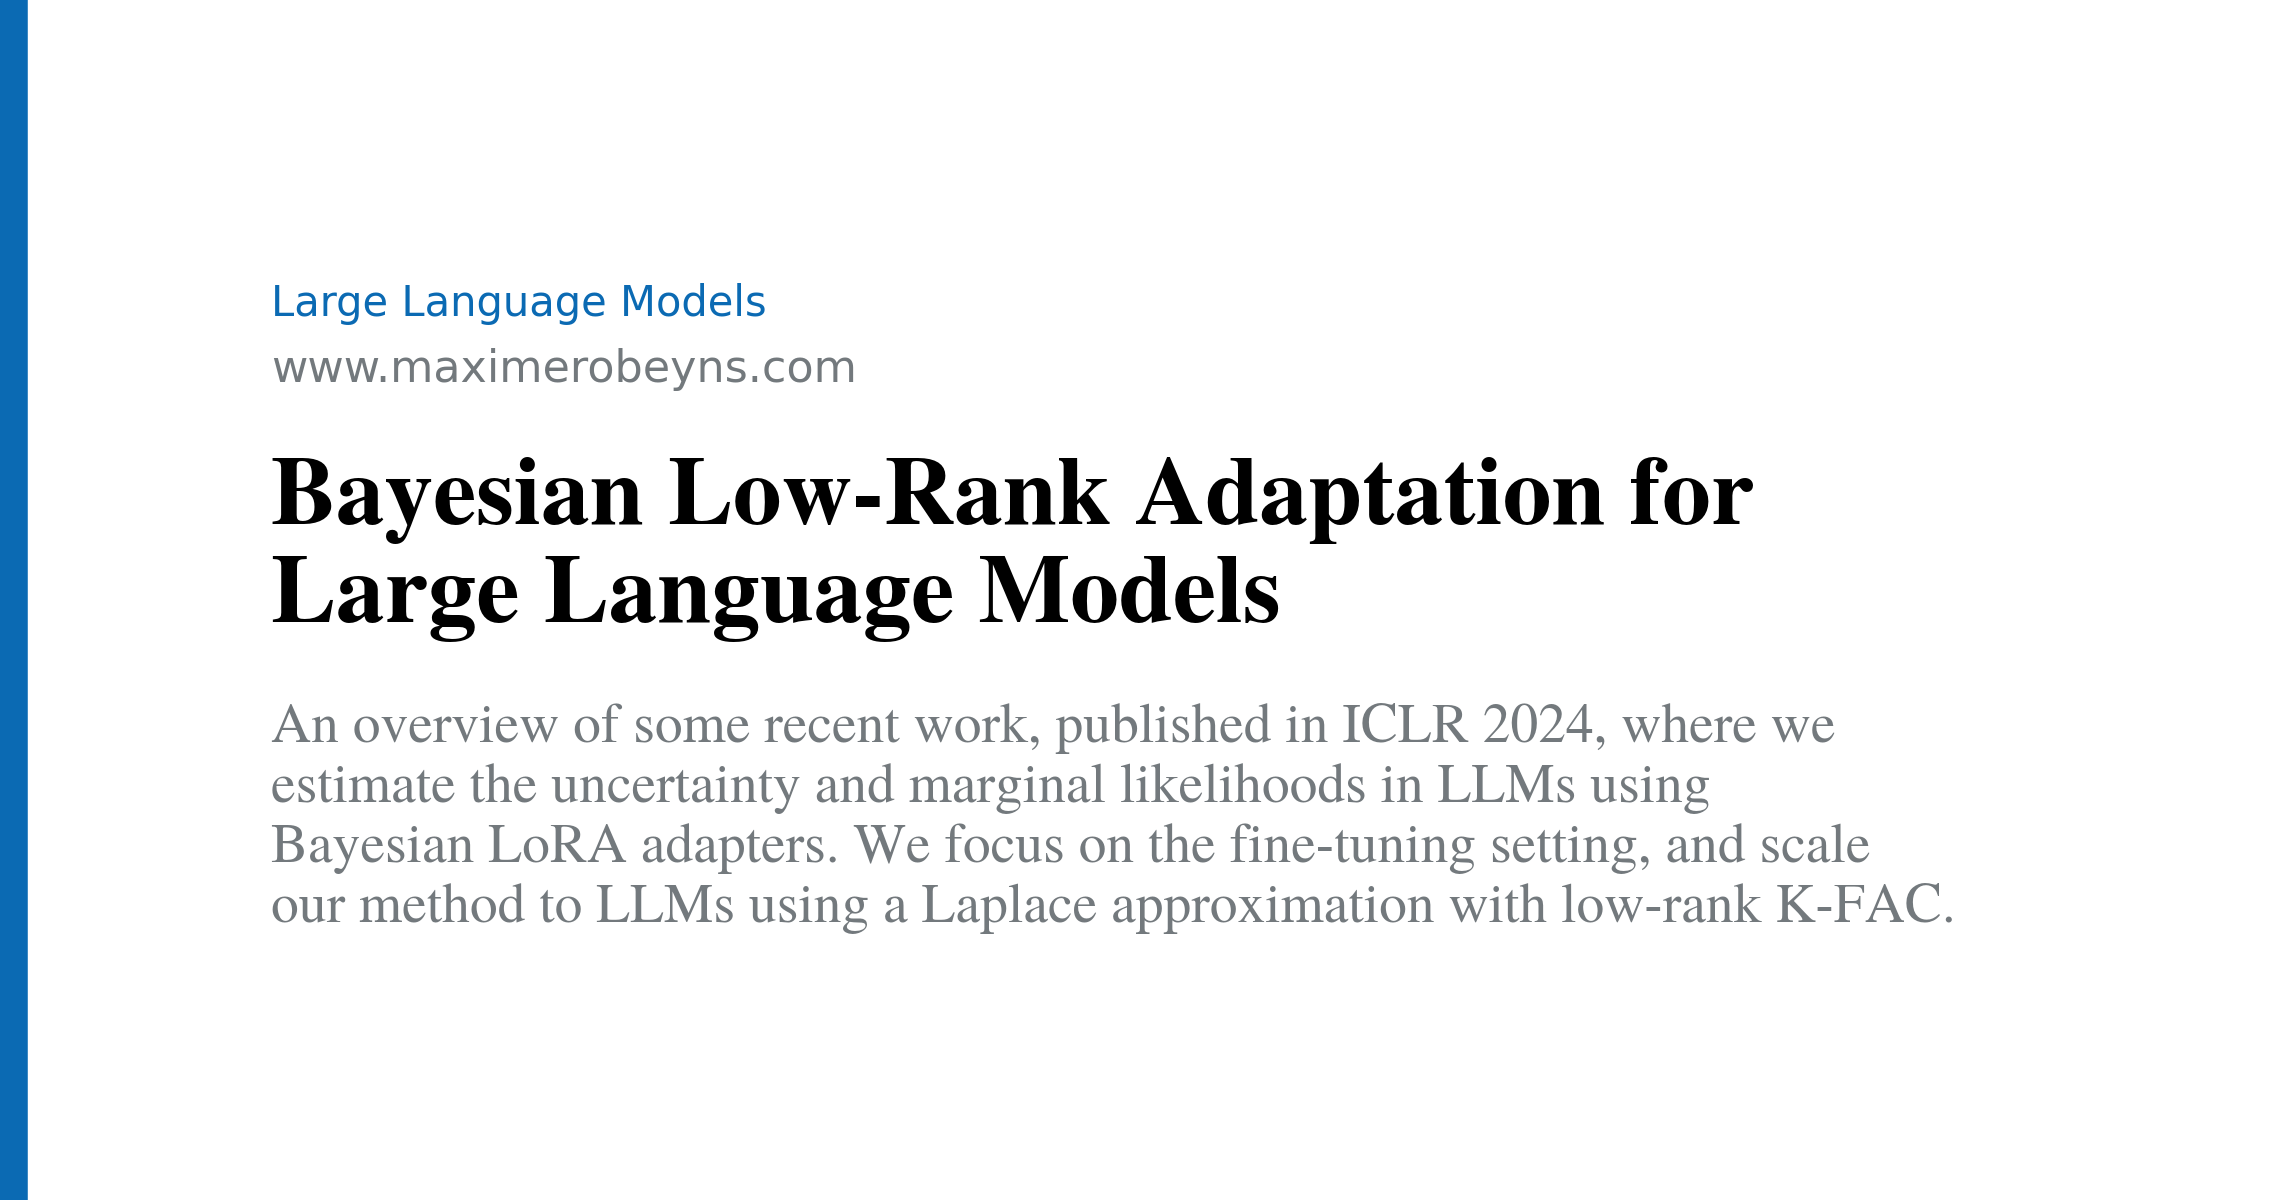 An overview of some recent work, published in ICLR 2024, where we estimate the uncertainty and marginal likelihoods in LLMs using Bayesian LoRA adapte